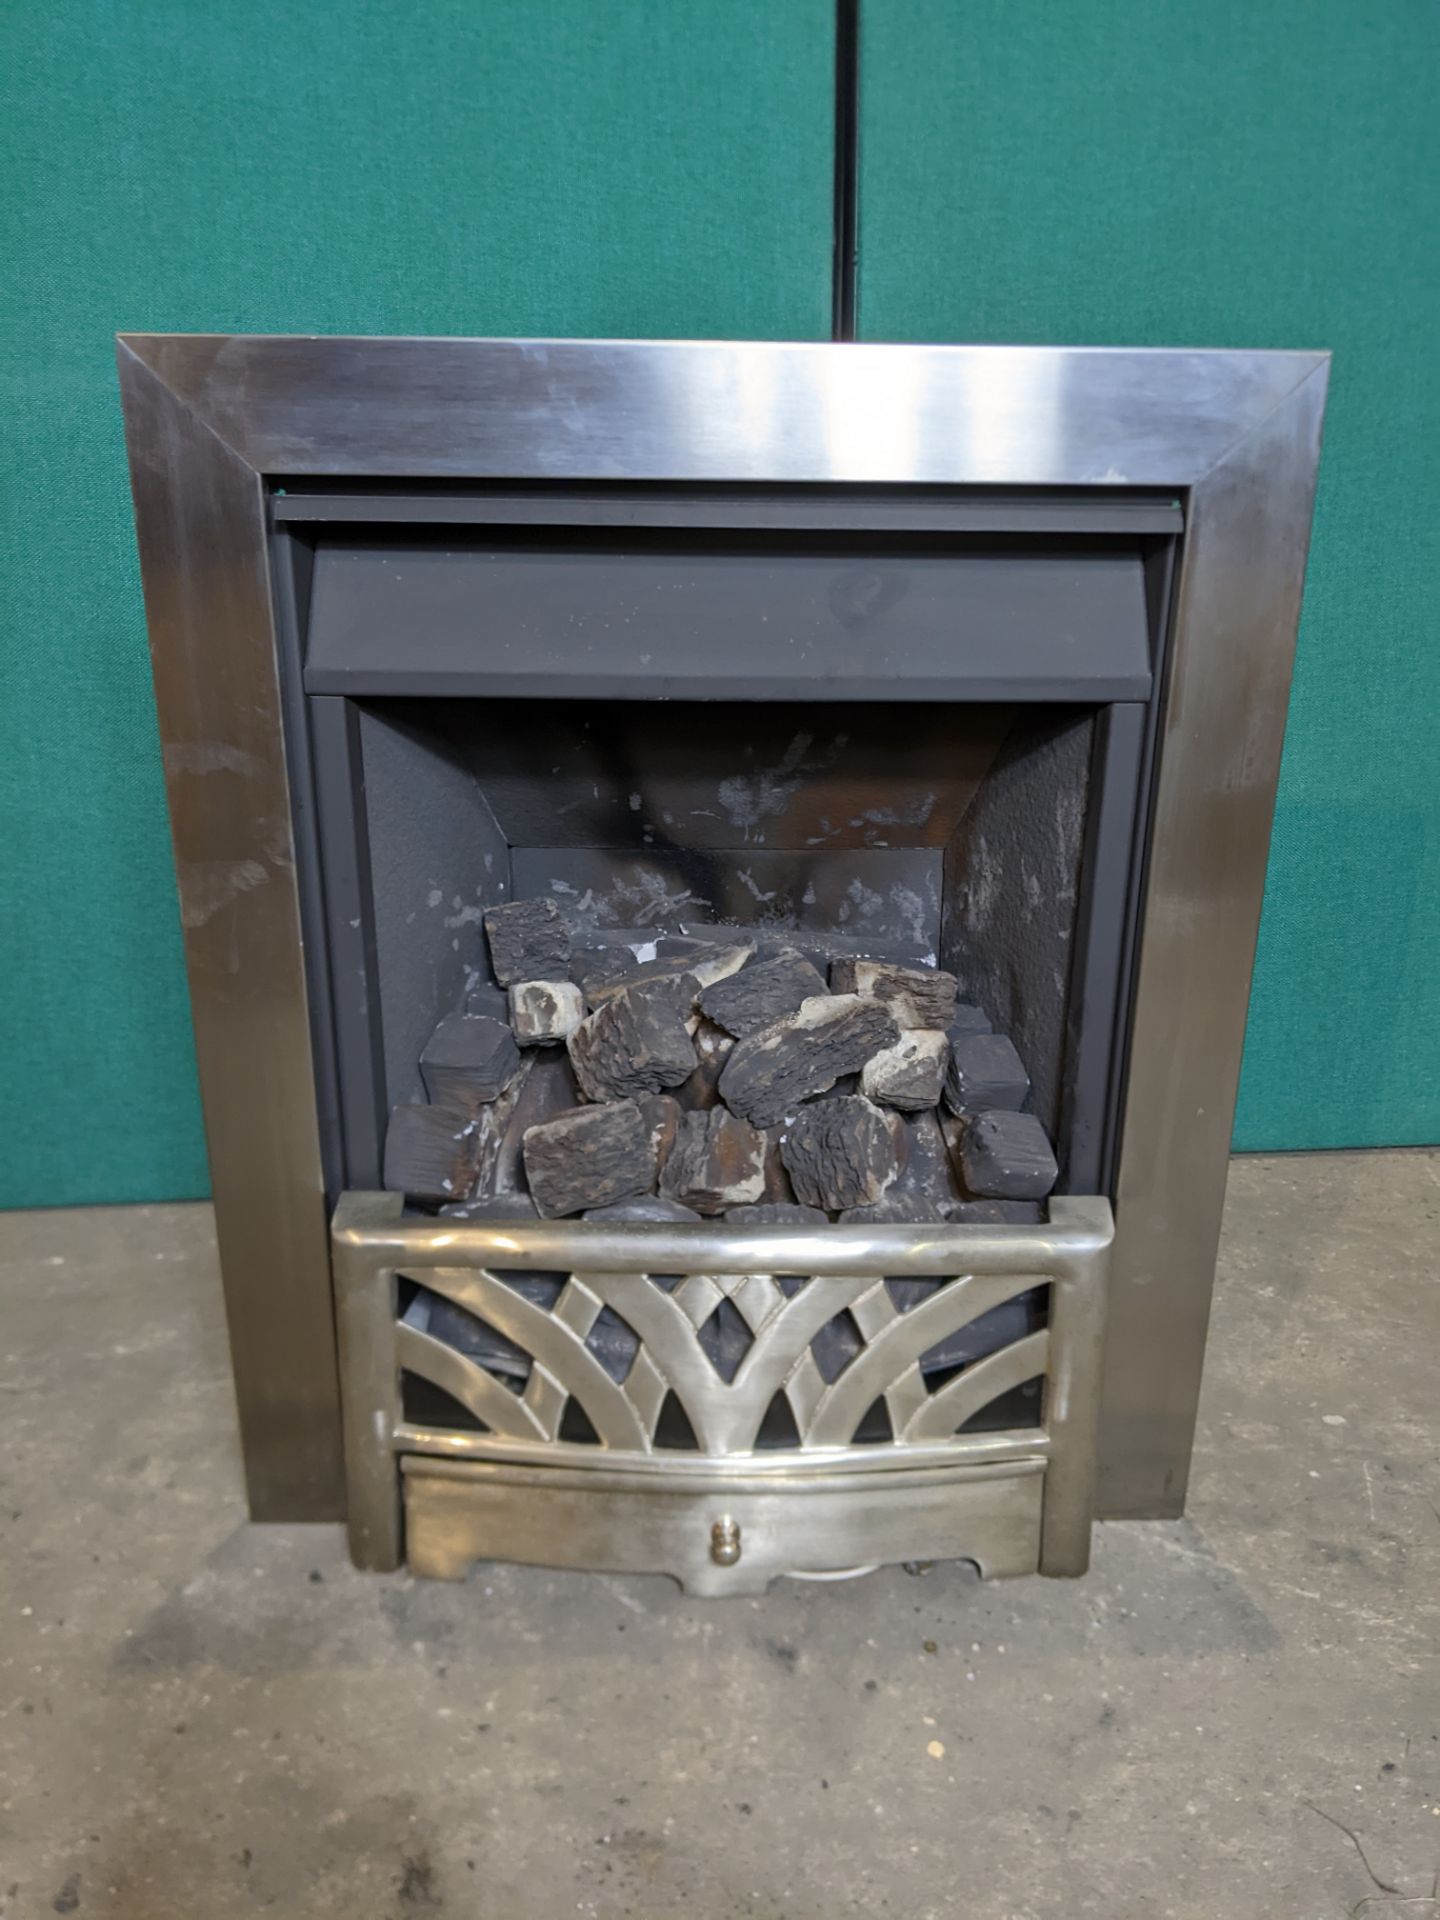 Ex Display Trent Fireplaces Gas Fire 615mm x 520mm x 200mm